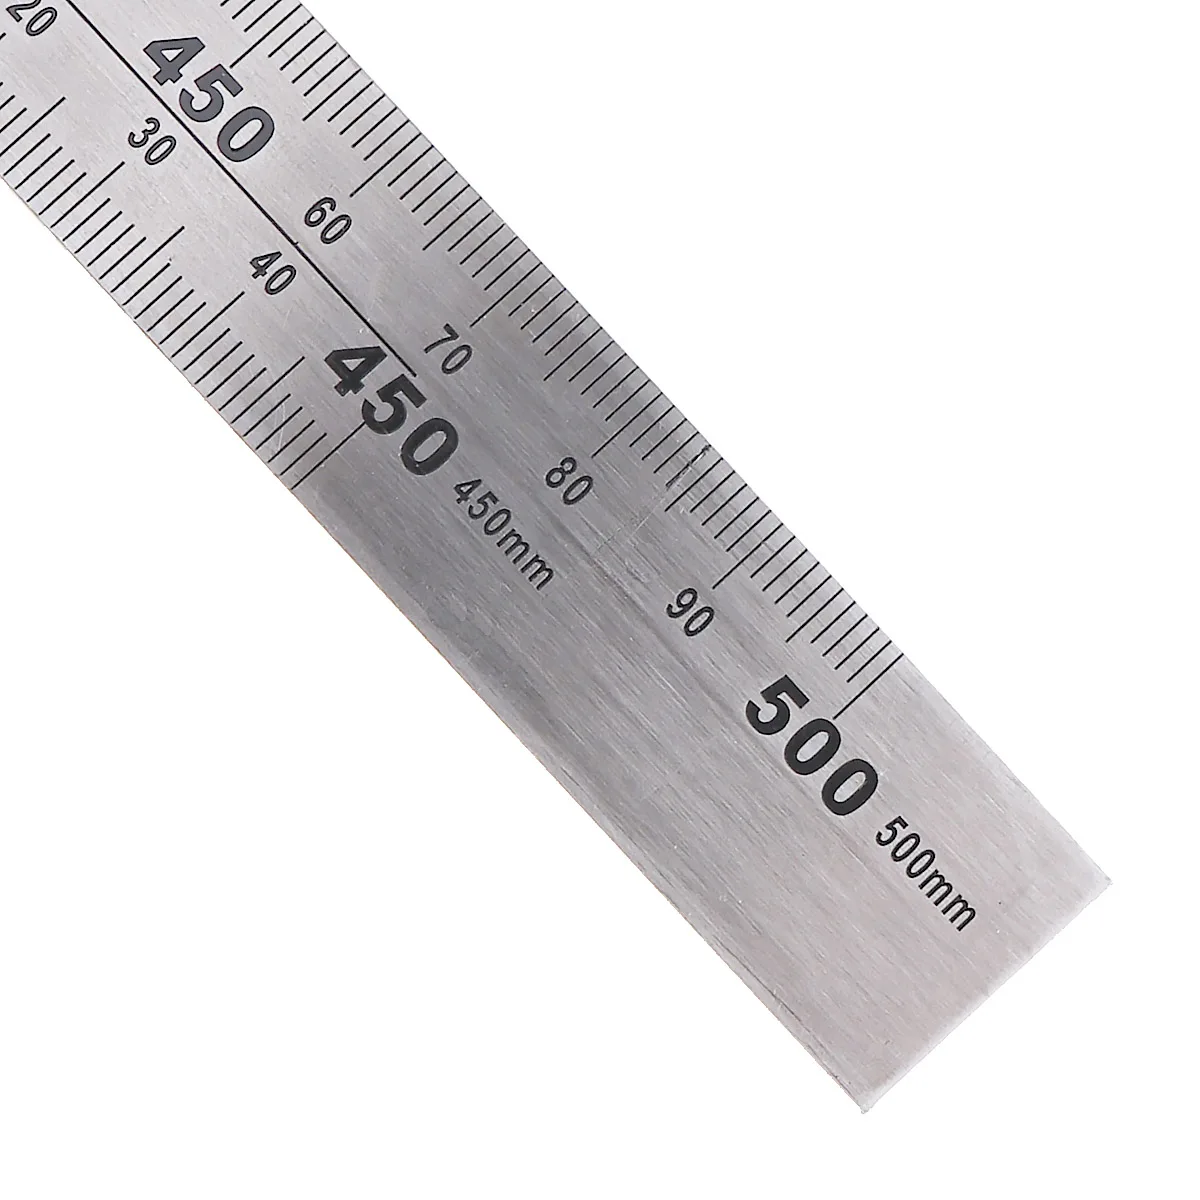 

250 x 500mm Thicker 1.2mm Stainless Steel 90 Degree Right Angle Ruler,Measuring Tools for Woodworking / Office